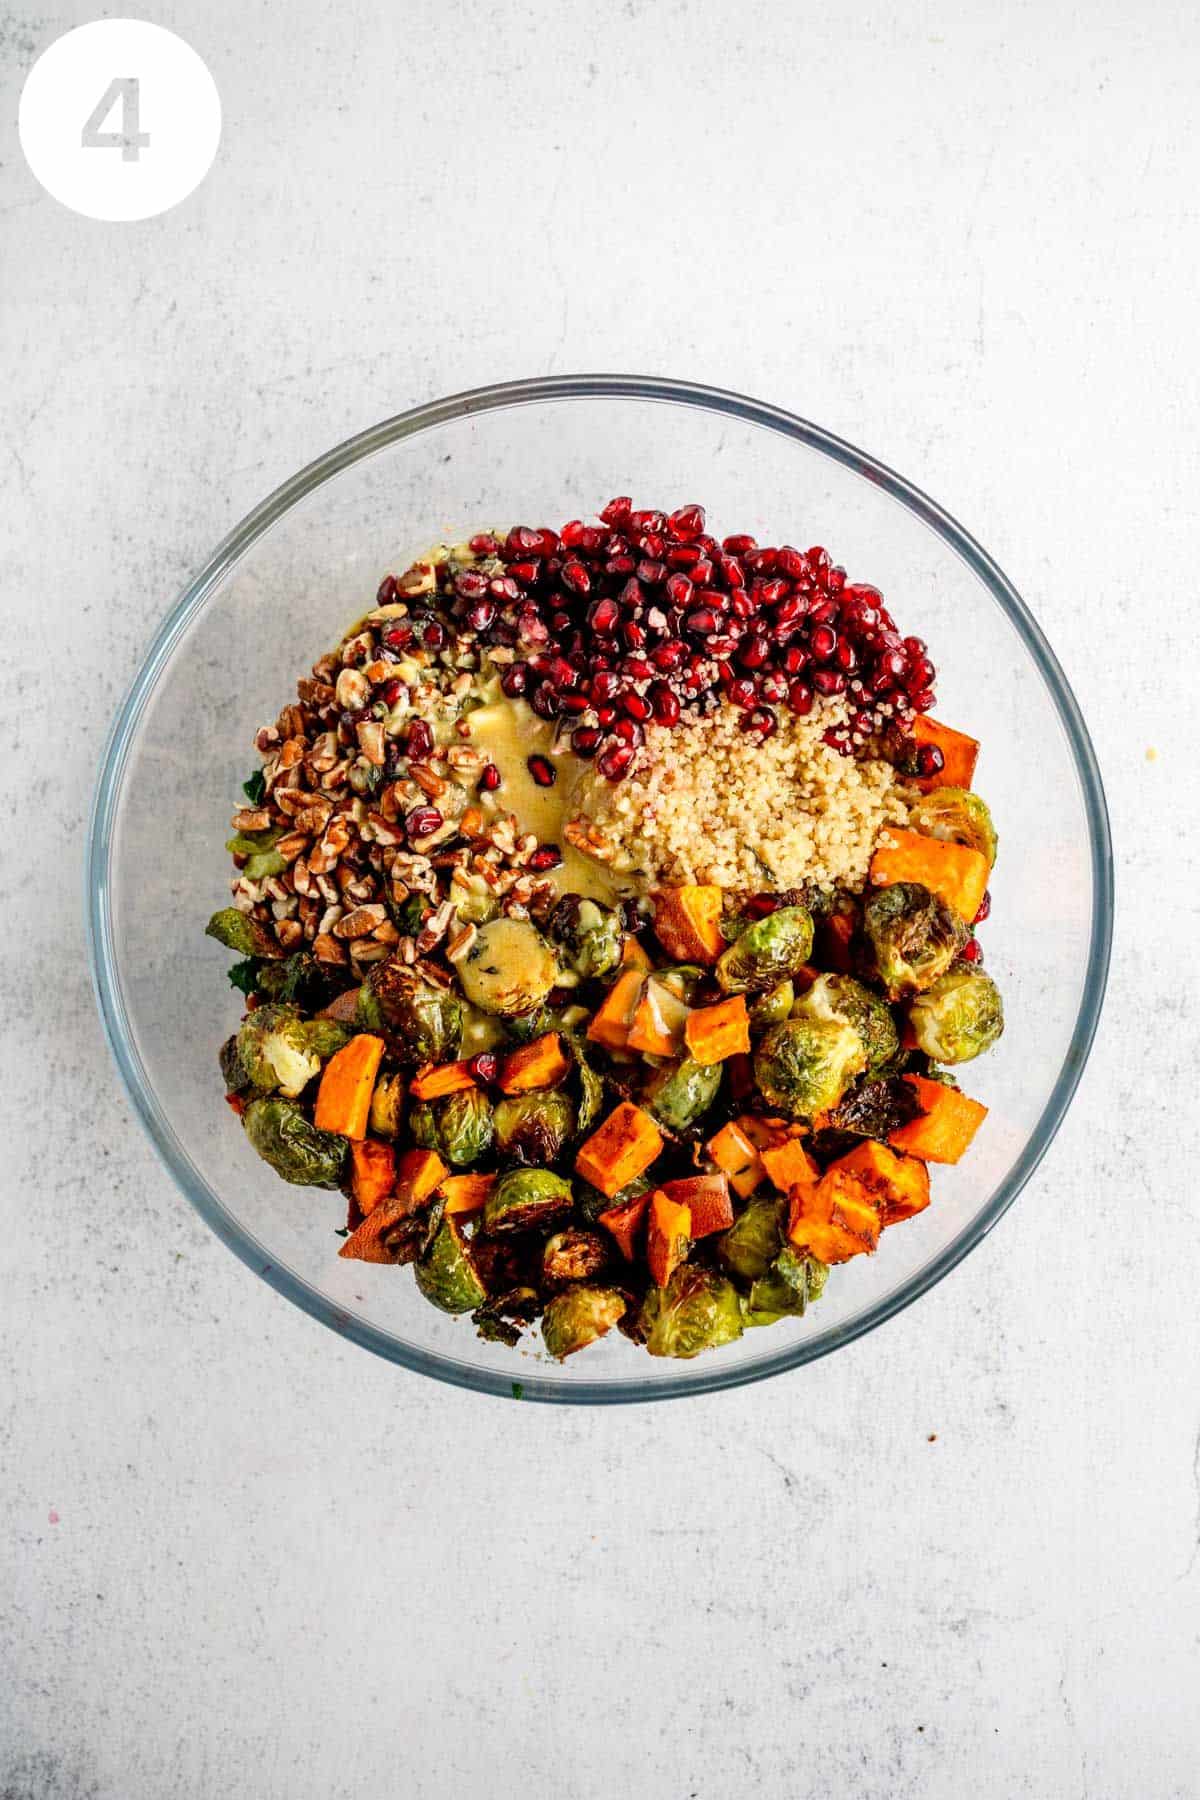 Quinoa salad with roasted vegetables unmixed in a glass bowl.